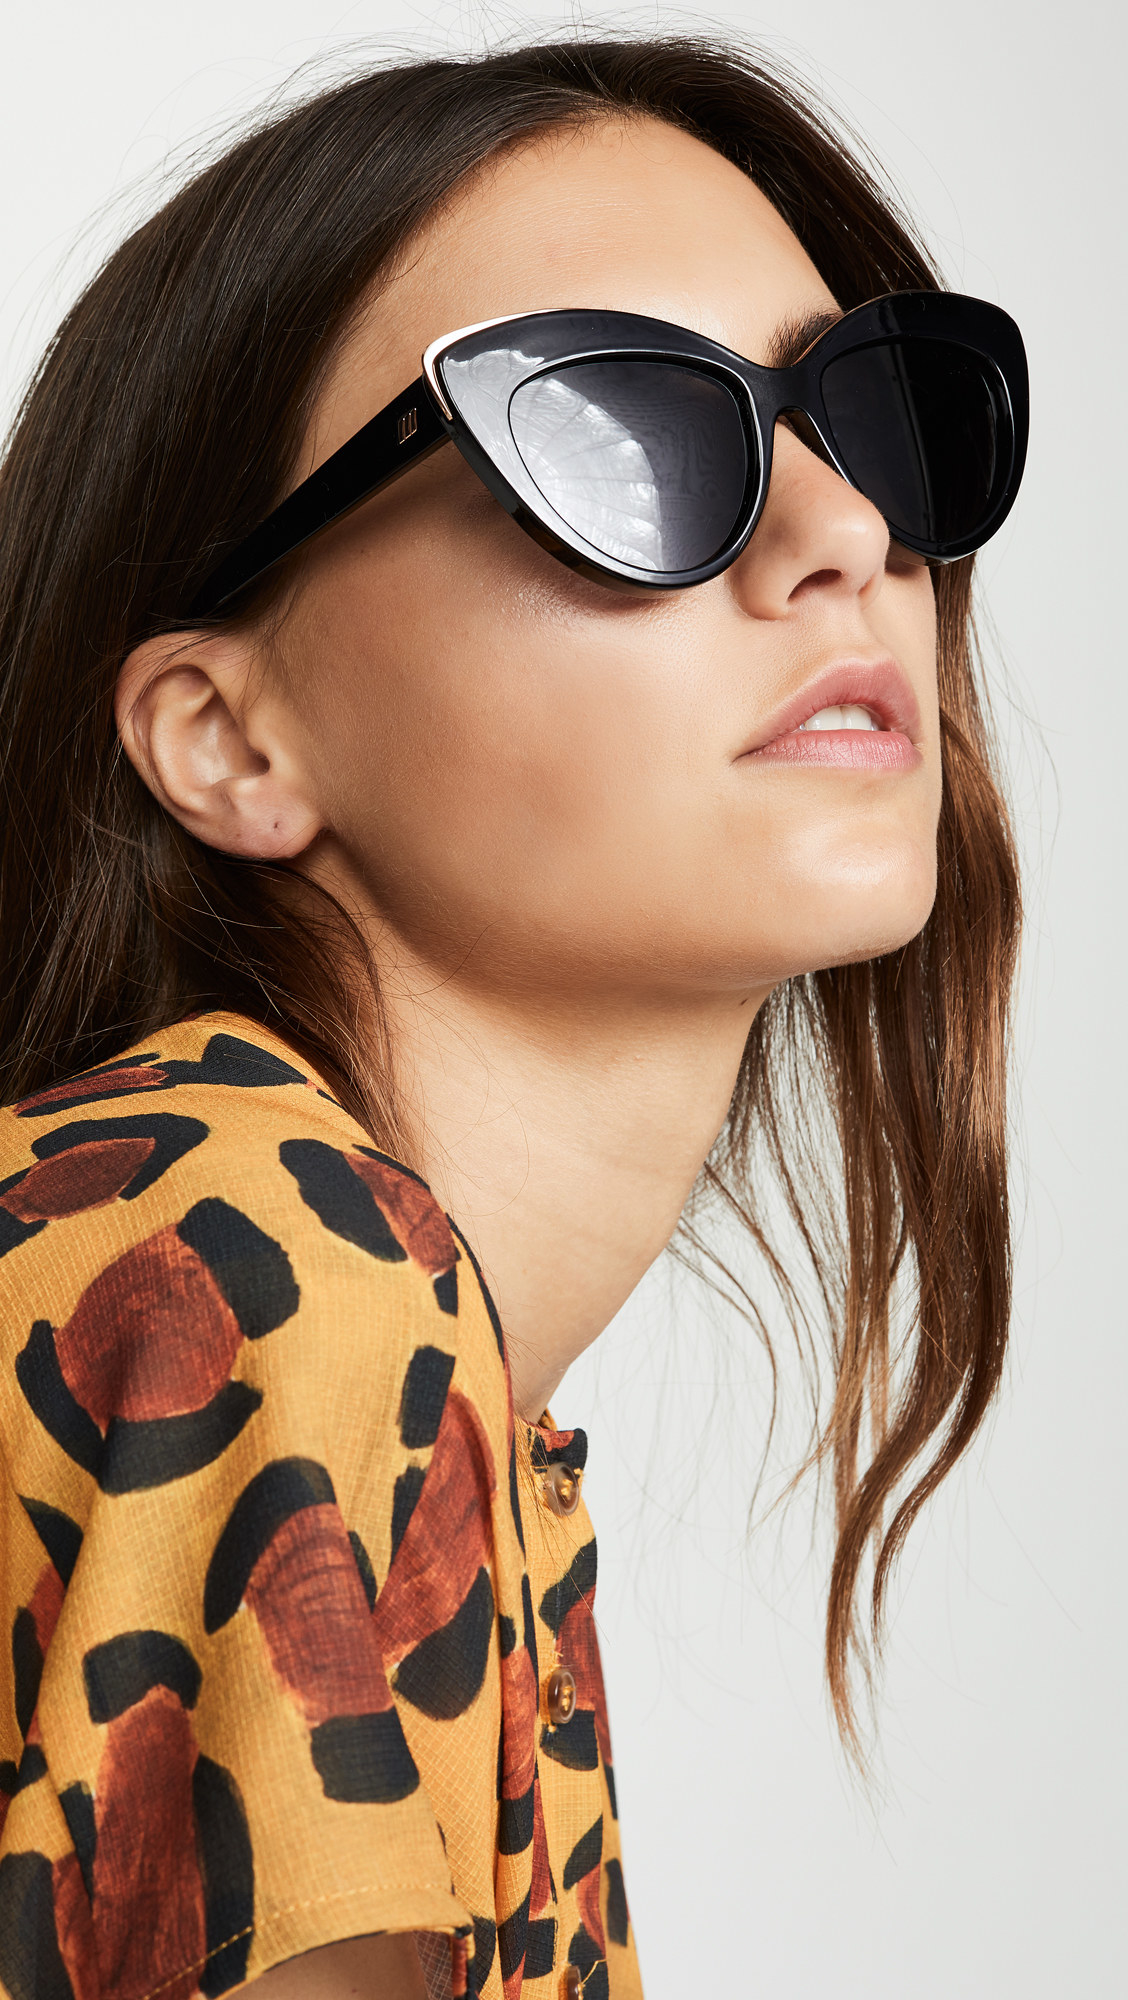 a model wearing the sunglasses: they have a thick cat-eye shape, are black, and have a subtle gold accent along the top of the rims